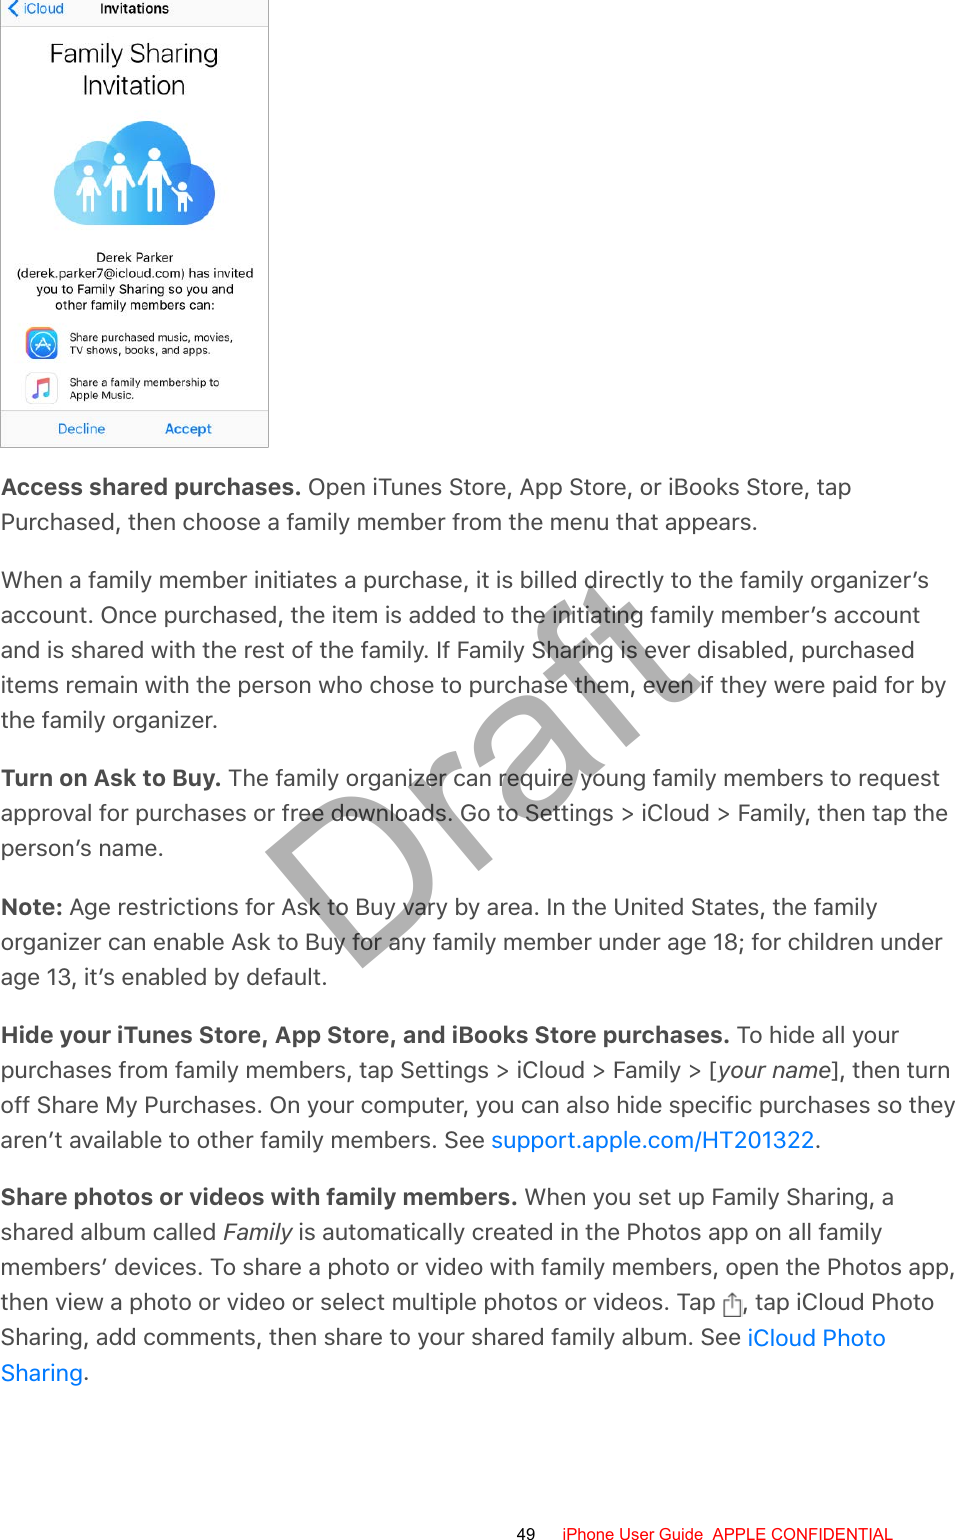 Access shared purchases. Open iTunes Store, App Store, or iBooks Store, tapPurchased, then choose a family member from the menu that appears.When a family member initiates a purchase, it is billed directly to the family organizer’saccount. Once purchased, the item is added to the initiating family member’s accountand is shared with the rest of the family. If Family Sharing is ever disabled, purchaseditems remain with the person who chose to purchase them, even if they were paid for bythe family organizer.Turn on Ask to Buy. The family organizer can require young family members to requestapproval for purchases or free downloads. Go to Settings &gt; iCloud &gt; Family, then tap theperson’s name.Note: Age restrictions for Ask to Buy vary by area. In the United States, the familyorganizer can enable Ask to Buy for any family member under age 18; for children underage 13, it’s enabled by default.Hide your iTunes Store, App Store, and iBooks Store purchases. To hide all yourpurchases from family members, tap Settings &gt; iCloud &gt; Family &gt; [your name], then turnoff Share My Purchases. On your computer, you can also hide specific purchases so theyaren’t available to other family members. See  .Share photos or videos with family members. When you set up Family Sharing, ashared album called Family is automatically created in the Photos app on all familymembers’ devices. To share a photo or video with family members, open the Photos app,then view a photo or video or select multiple photos or videos. Tap  , tap iCloud PhotoSharing, add comments, then share to your shared family album. See .support.apple.com/HT201322iCloud PhotoSharing49 iPhone User Guide  APPLE CONFIDENTIALDraft